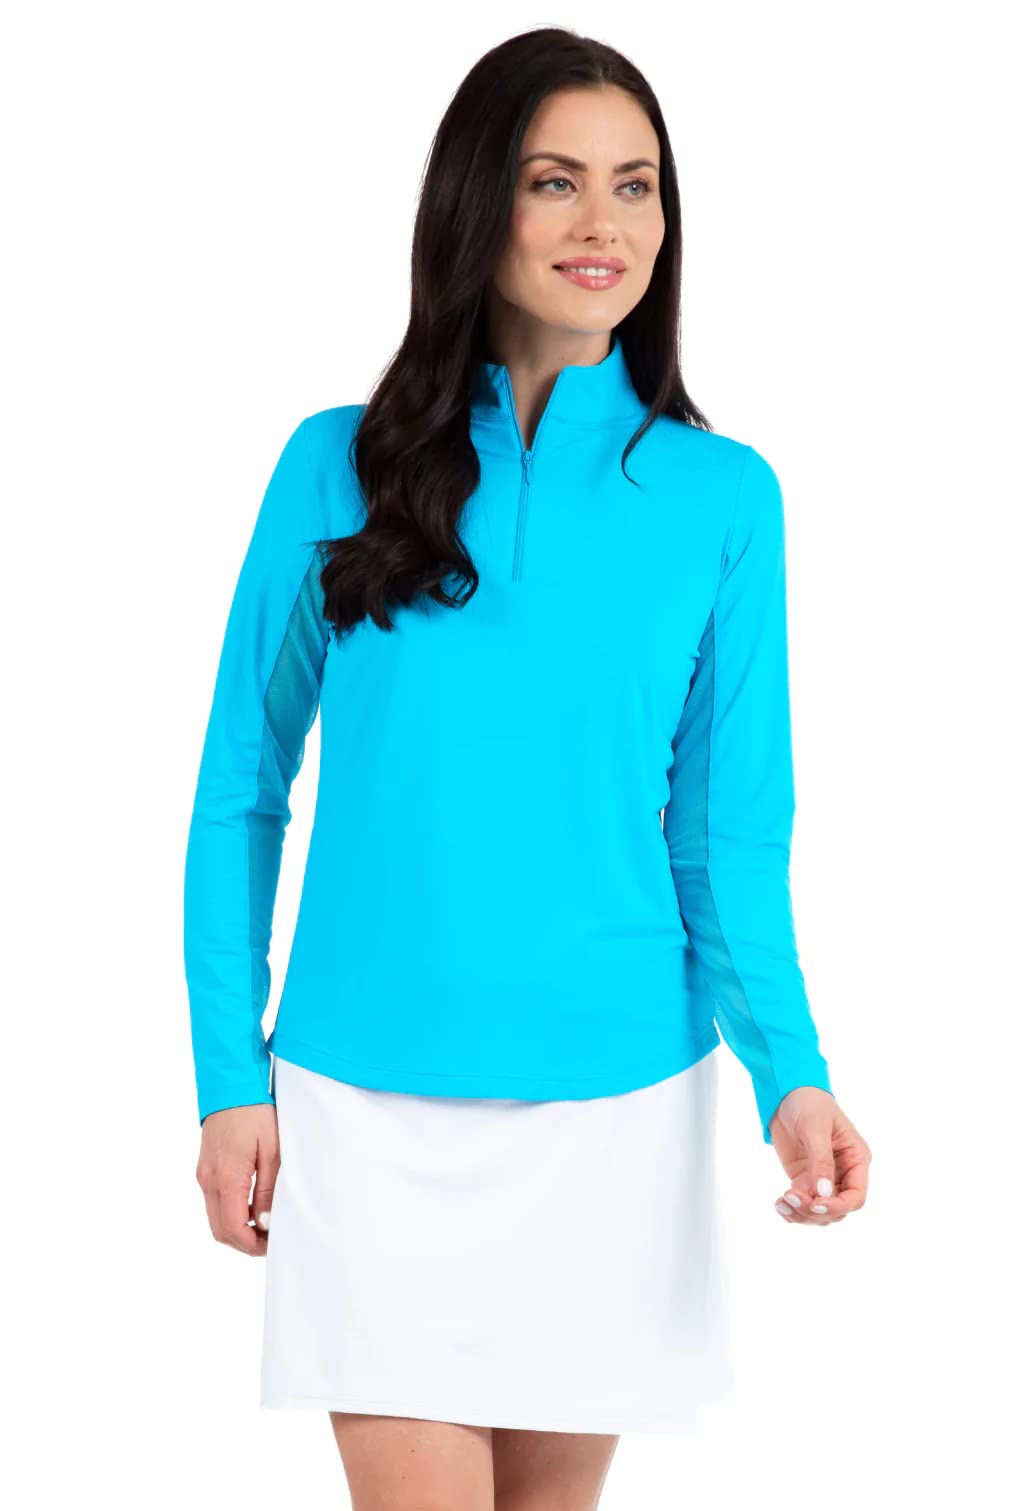 IBKUL Athleisure Wear Sun Protective UPF 50+ Icefil Cooling Tech Long Sleeve Mock Neck Top with Under Arm Mesh 80000 Turquoise Solid M